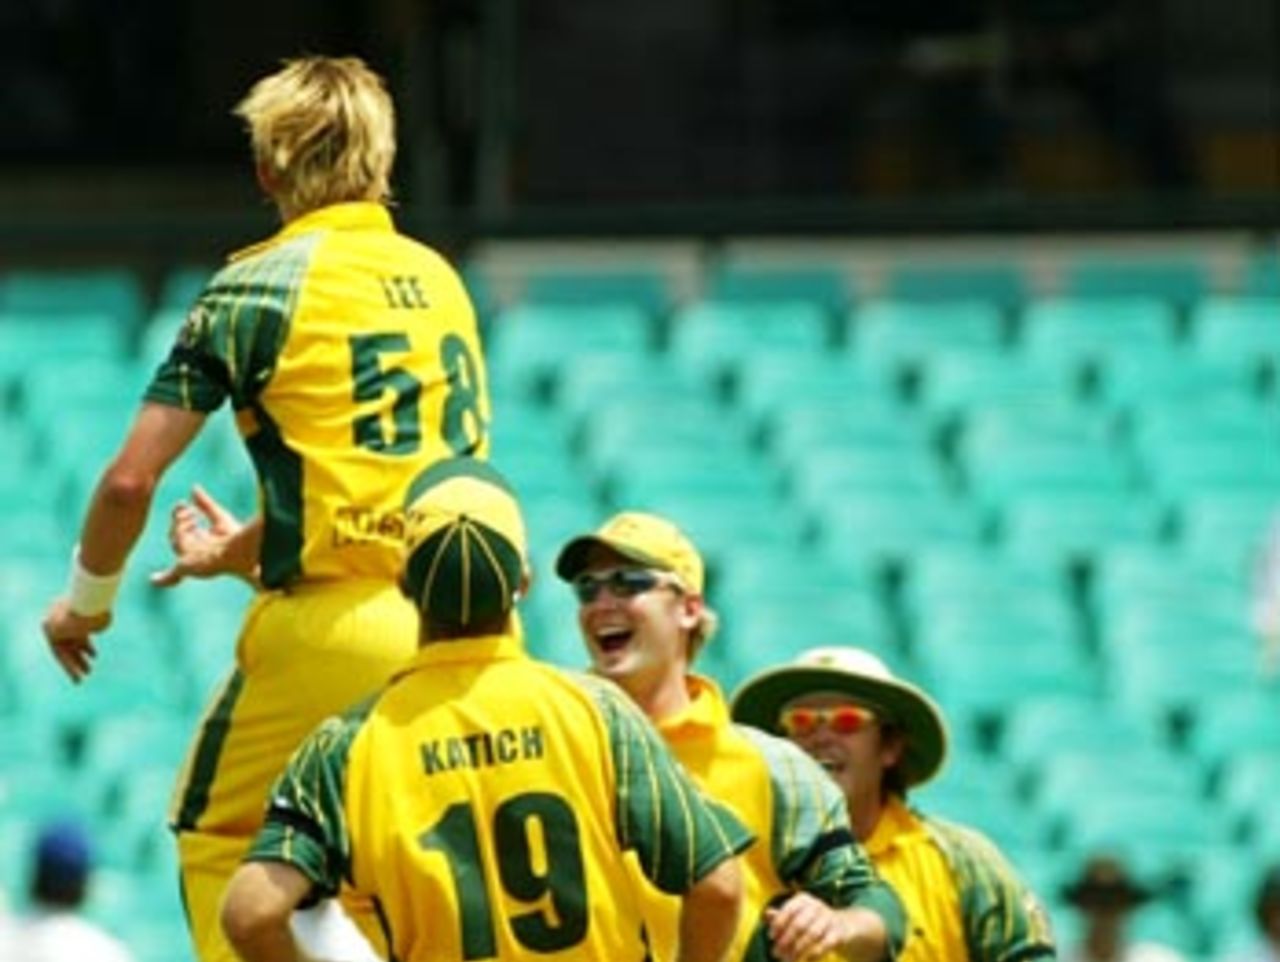 Brett Lee takes all of three balls to send Sourav Ganguly back, which is exactly what he needs after the previous two games, Australia v India, VB Series, 7th ODI, Sydney, January 22, 2004